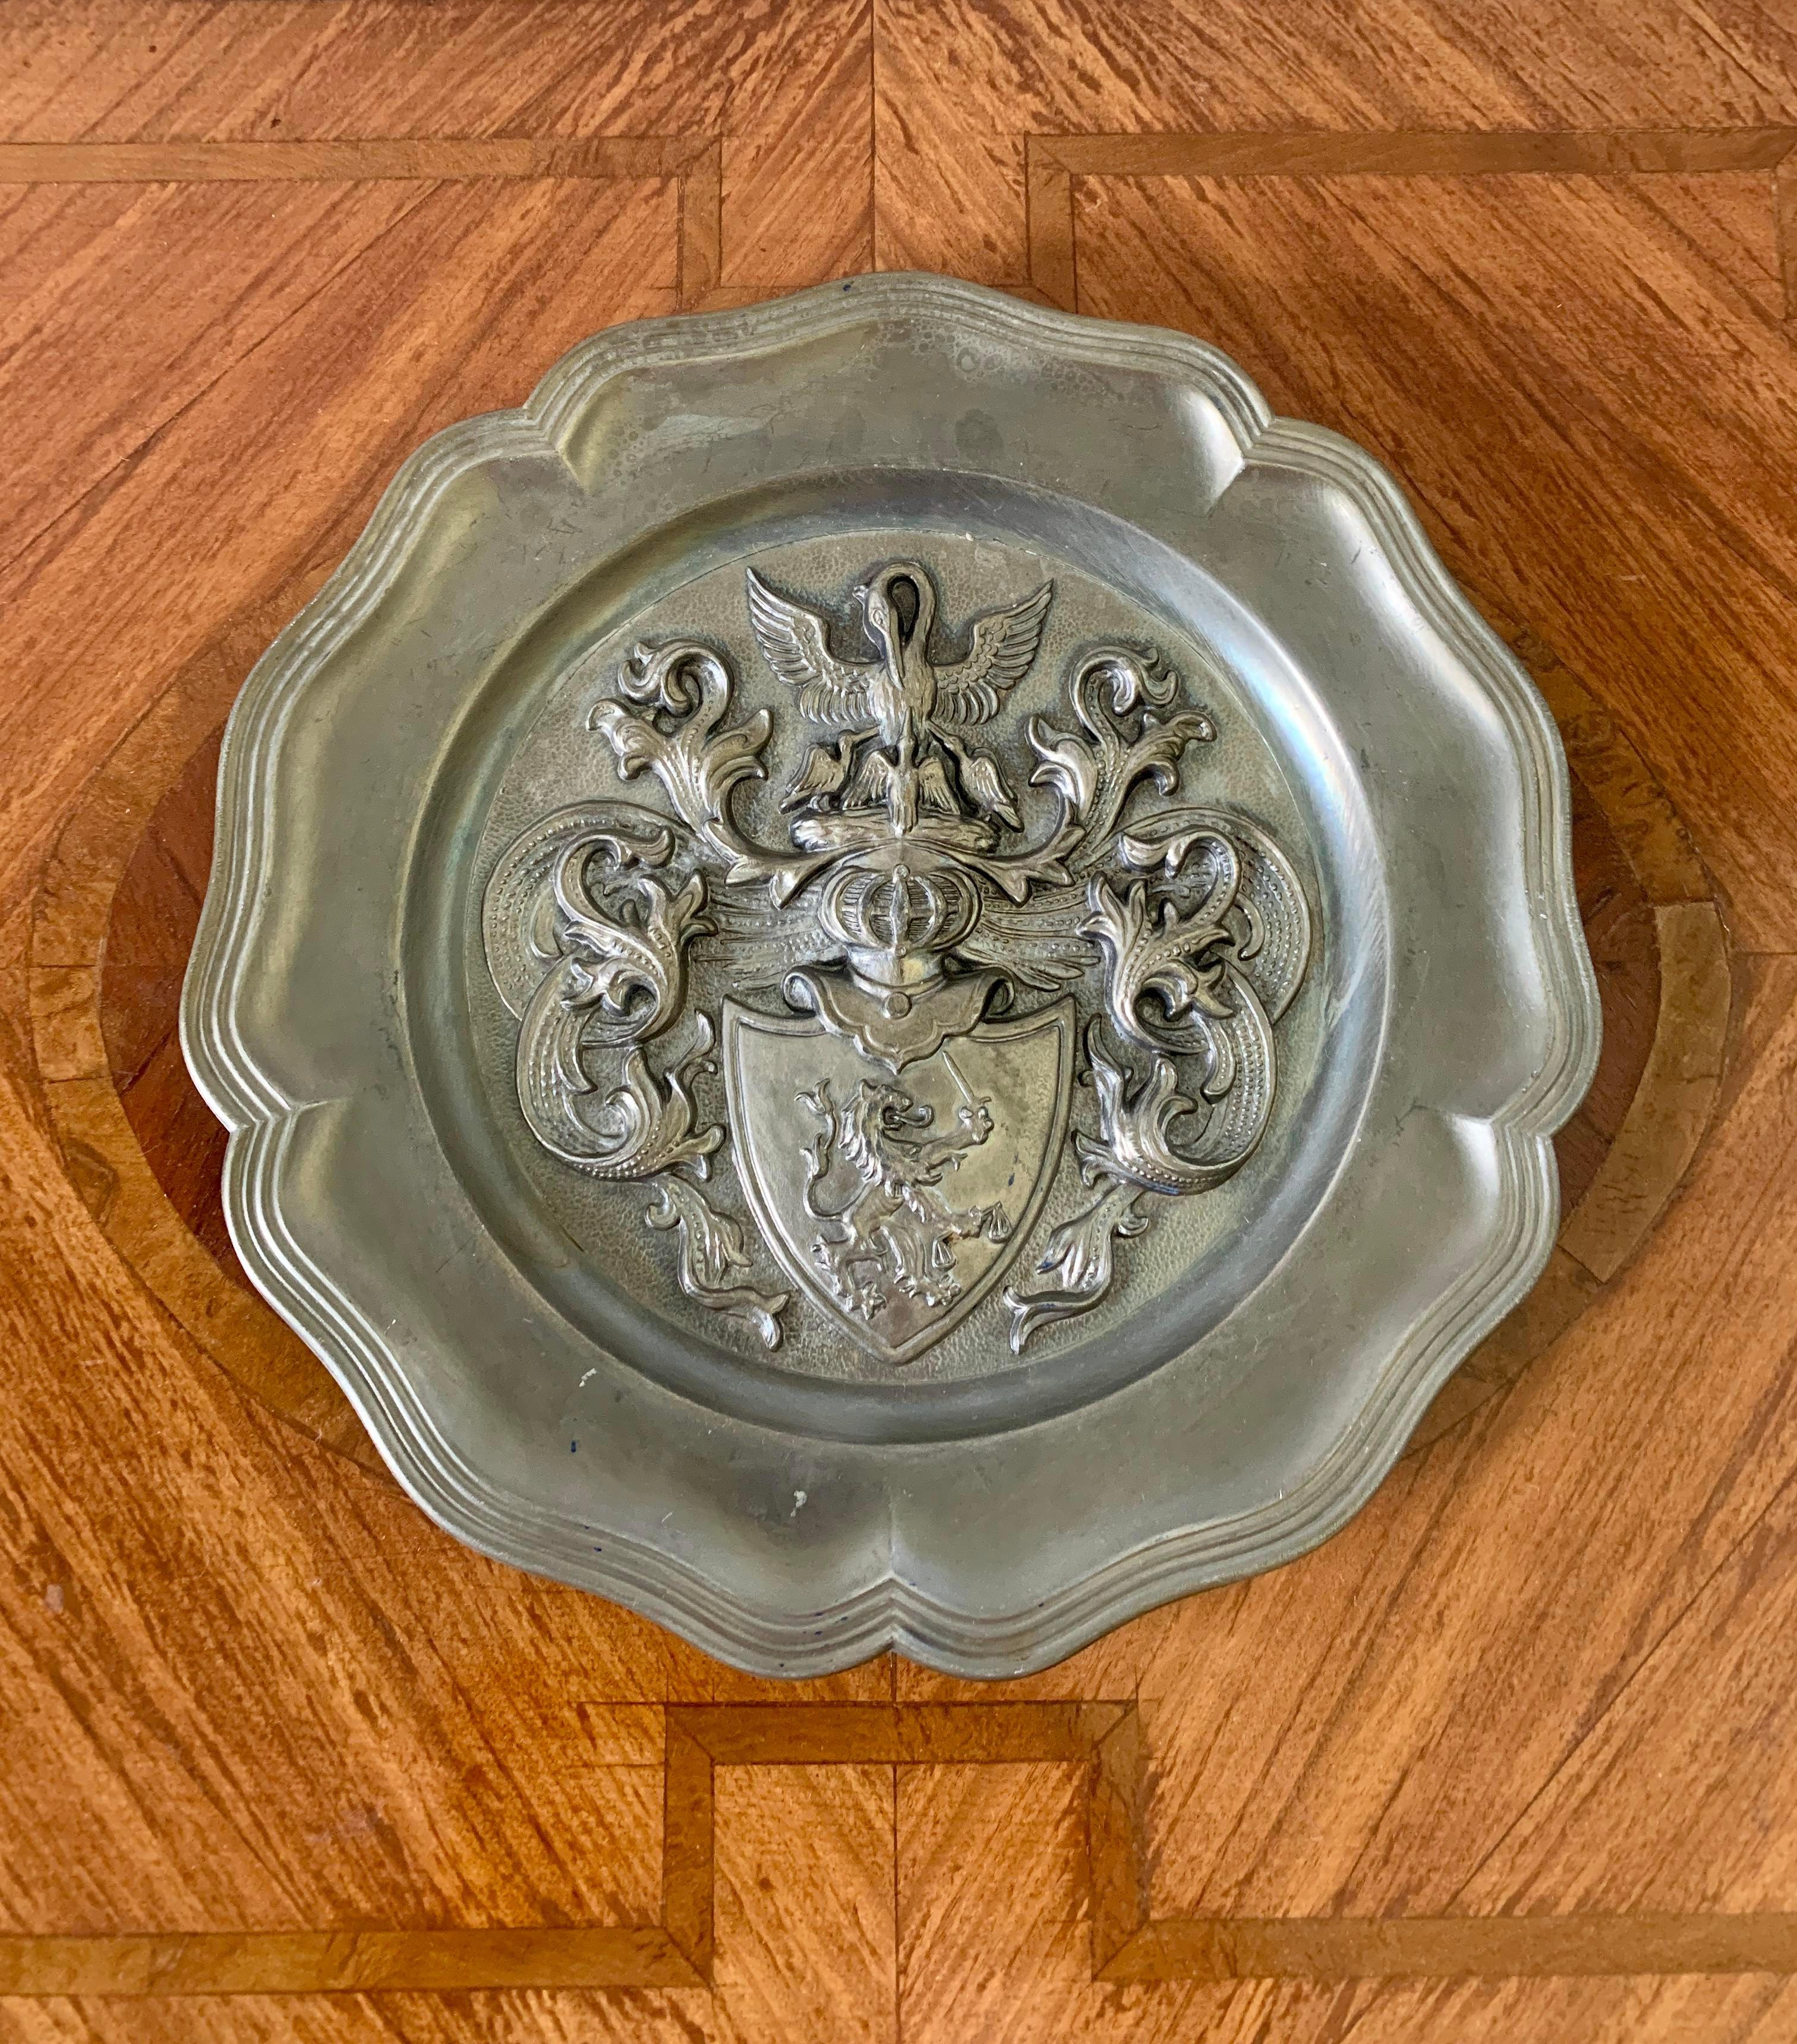 An early 20th century German pewter wall plate with a family crest consisting of a lion with sword on a shield culminating in a mother pelican feeding her babies. The symbolism of the mother pelican feeding her baby pelicans is part of an ancient